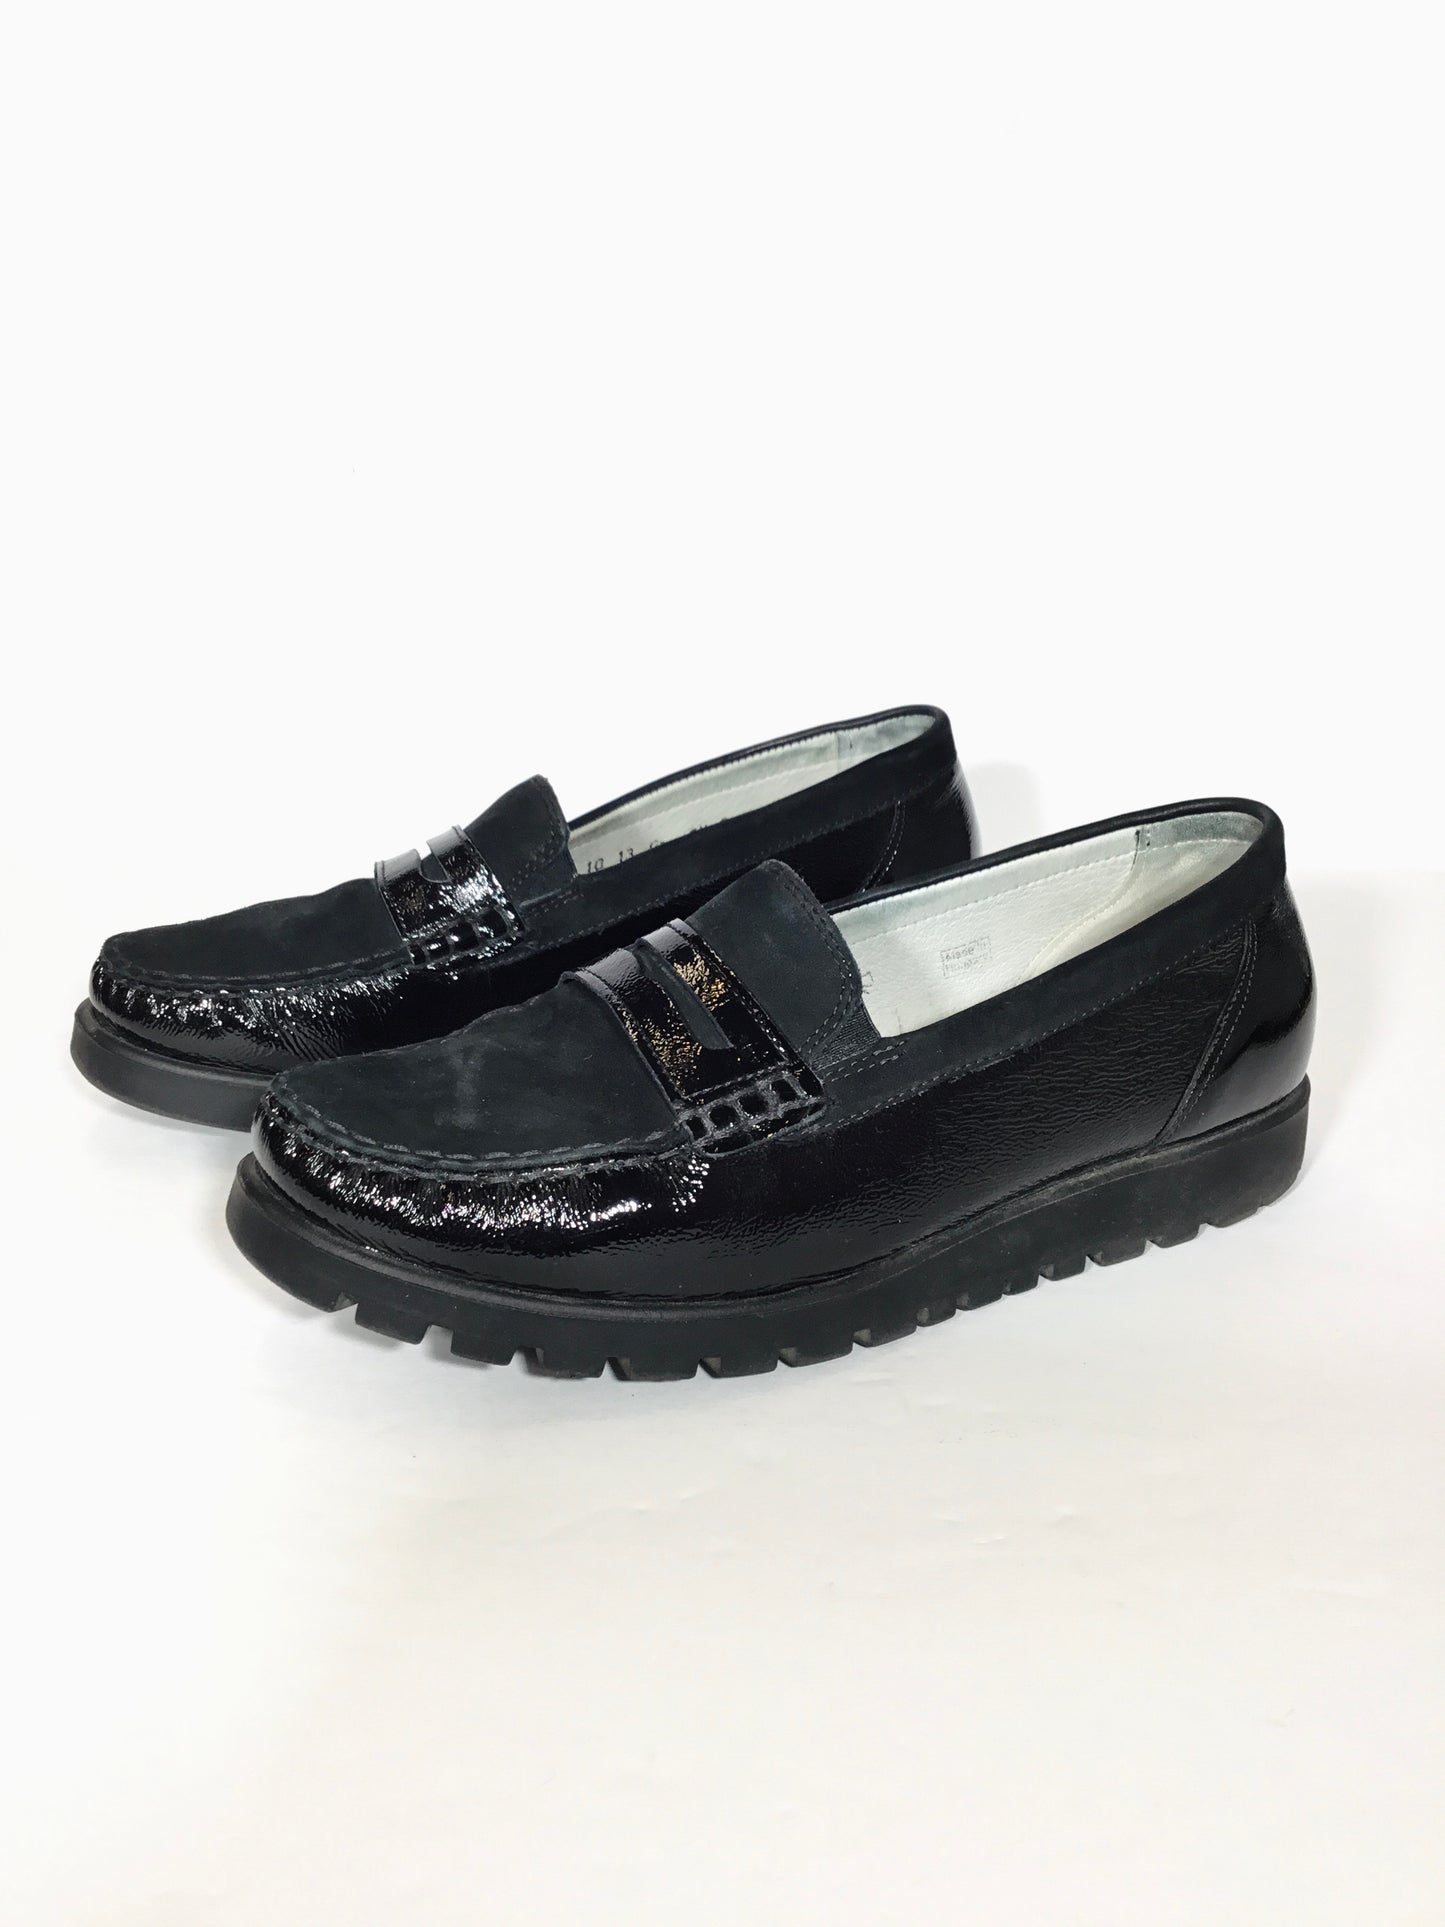 Shoes Flats Loafer Oxford By Clothes Mentor  Size: 6.5